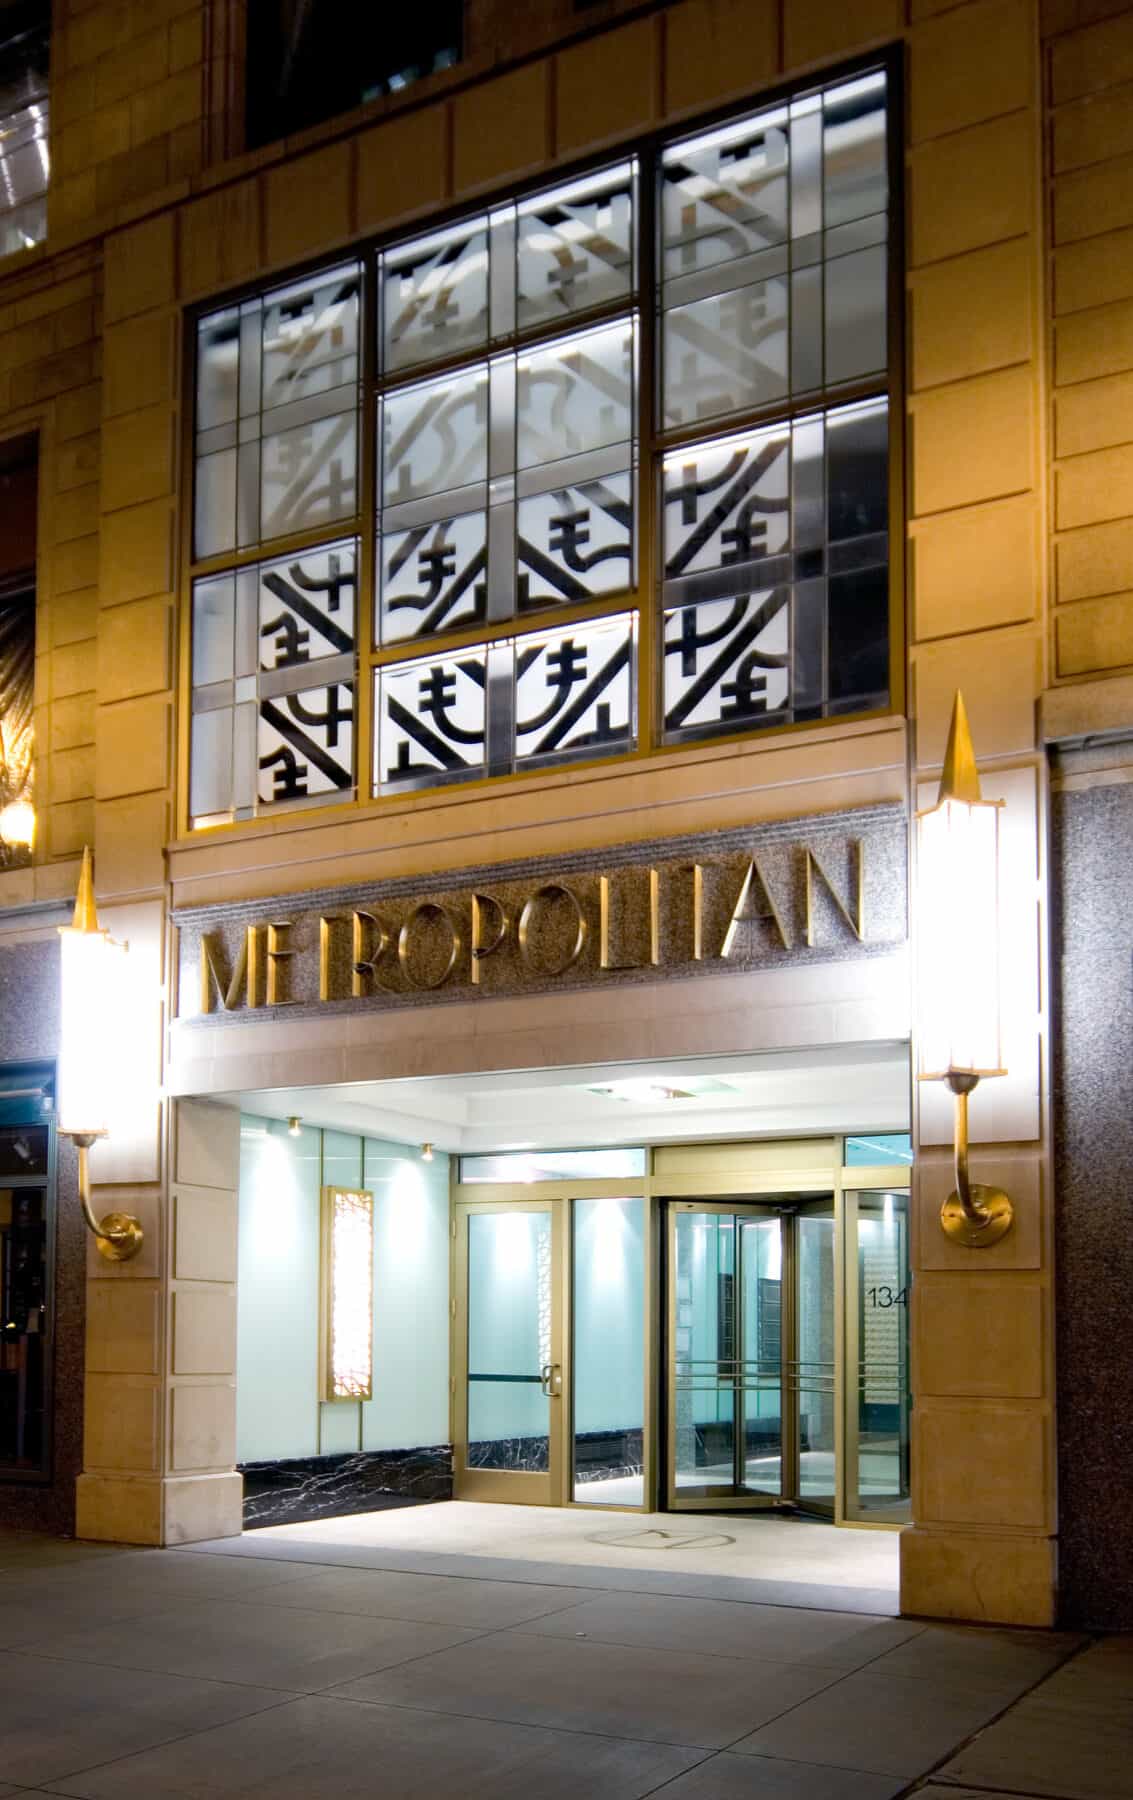 Custom Metal Fabrication of Signage and Entrance of Metropolitan Building from Construction Specialty Projects by Commercial Builder & General Contractor Structural Enterprises